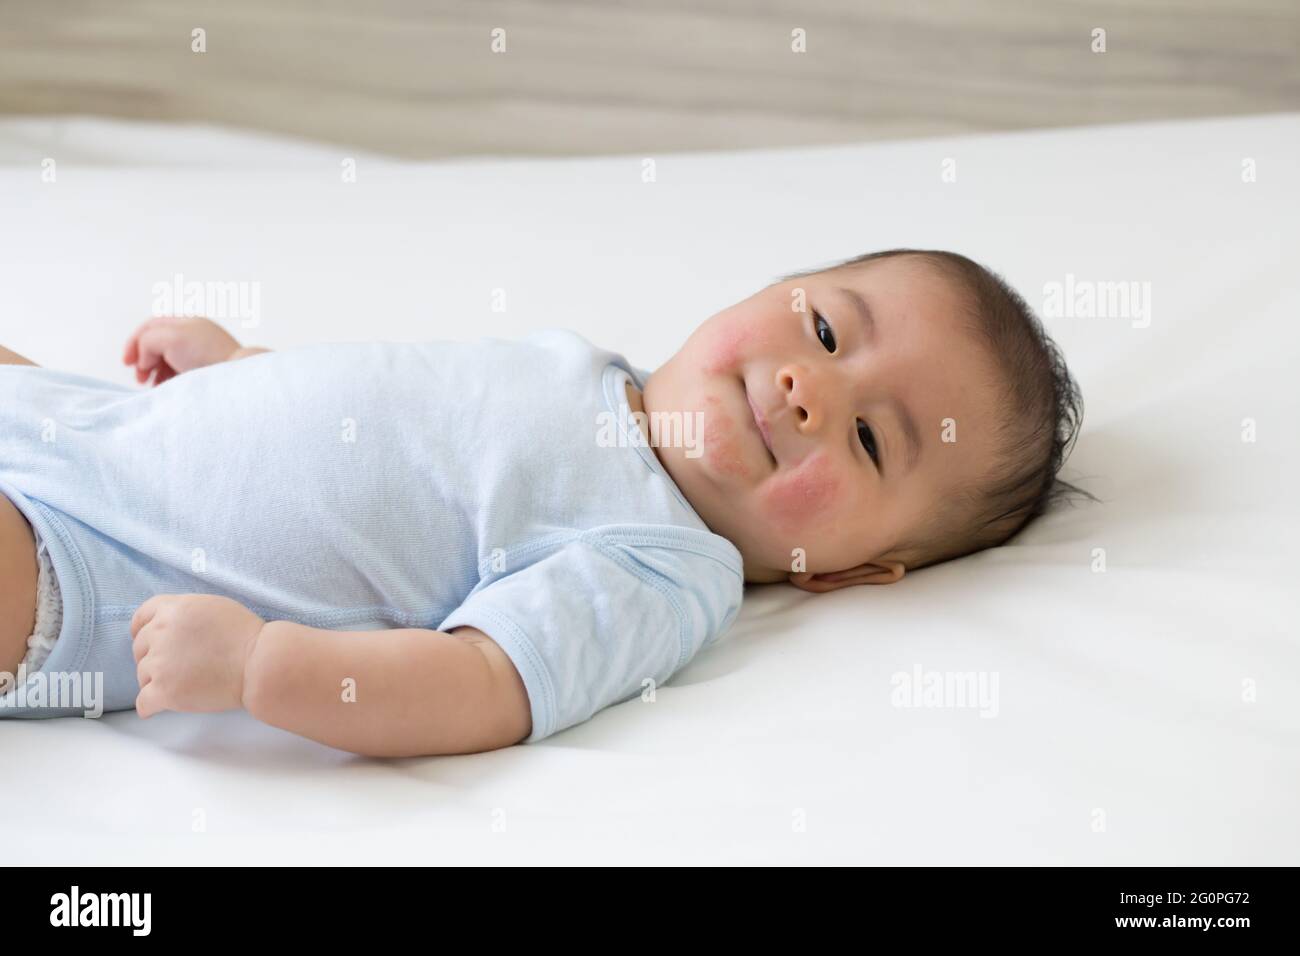 Asian baby boy lying on the bed and had a red rash on the face, Skin common rashes in newborn concept Stock Photo